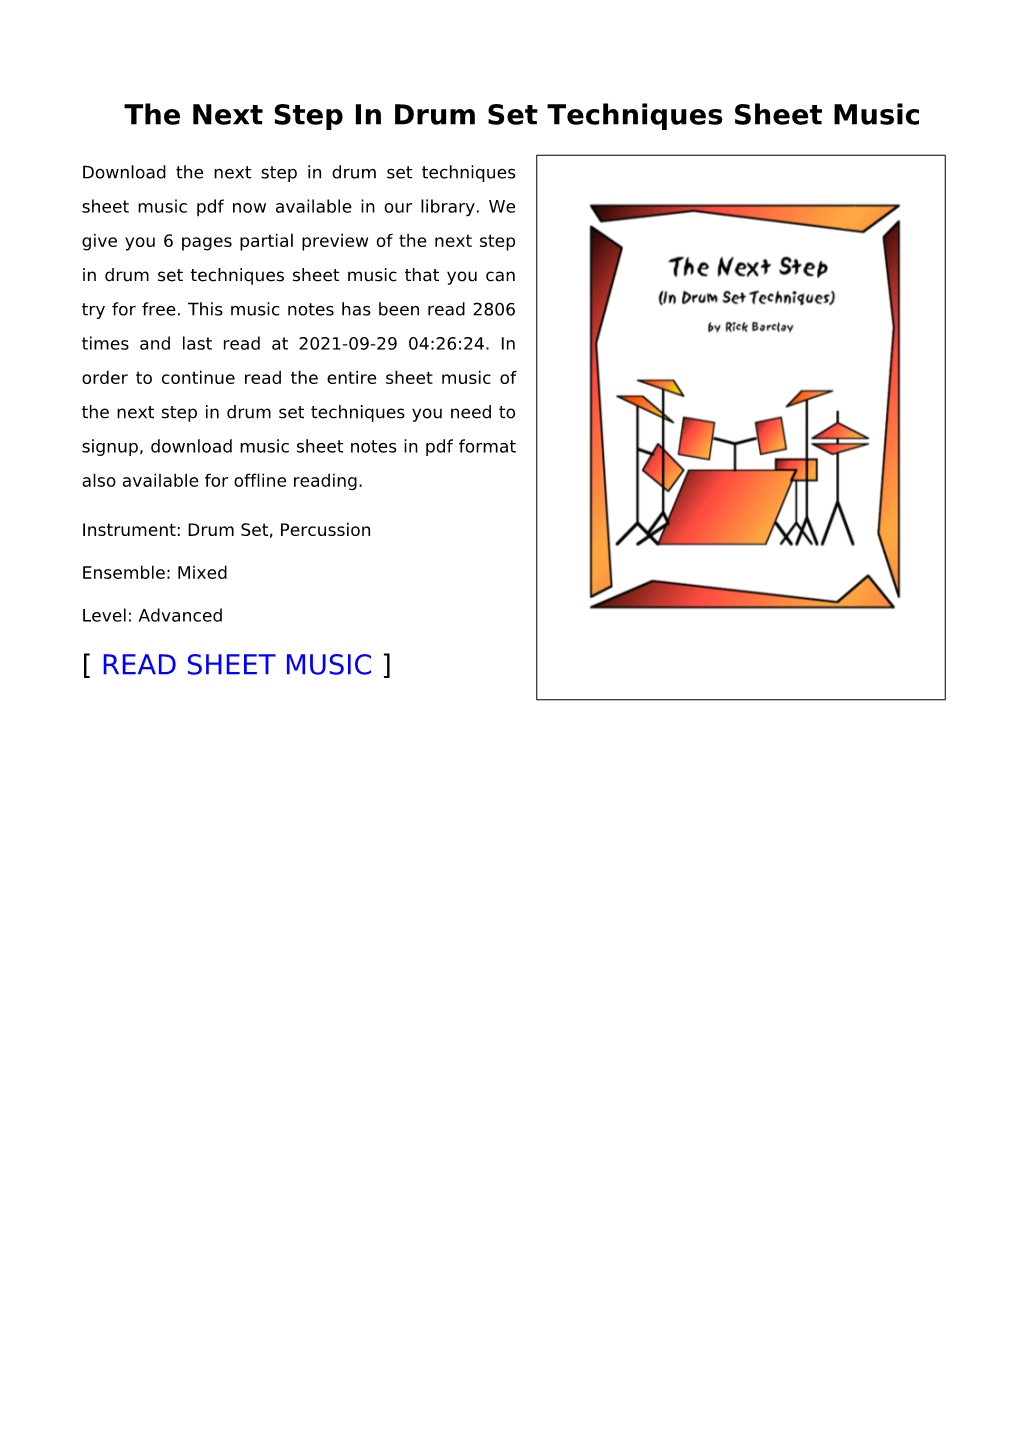 The Next Step in Drum Set Techniques Sheet Music